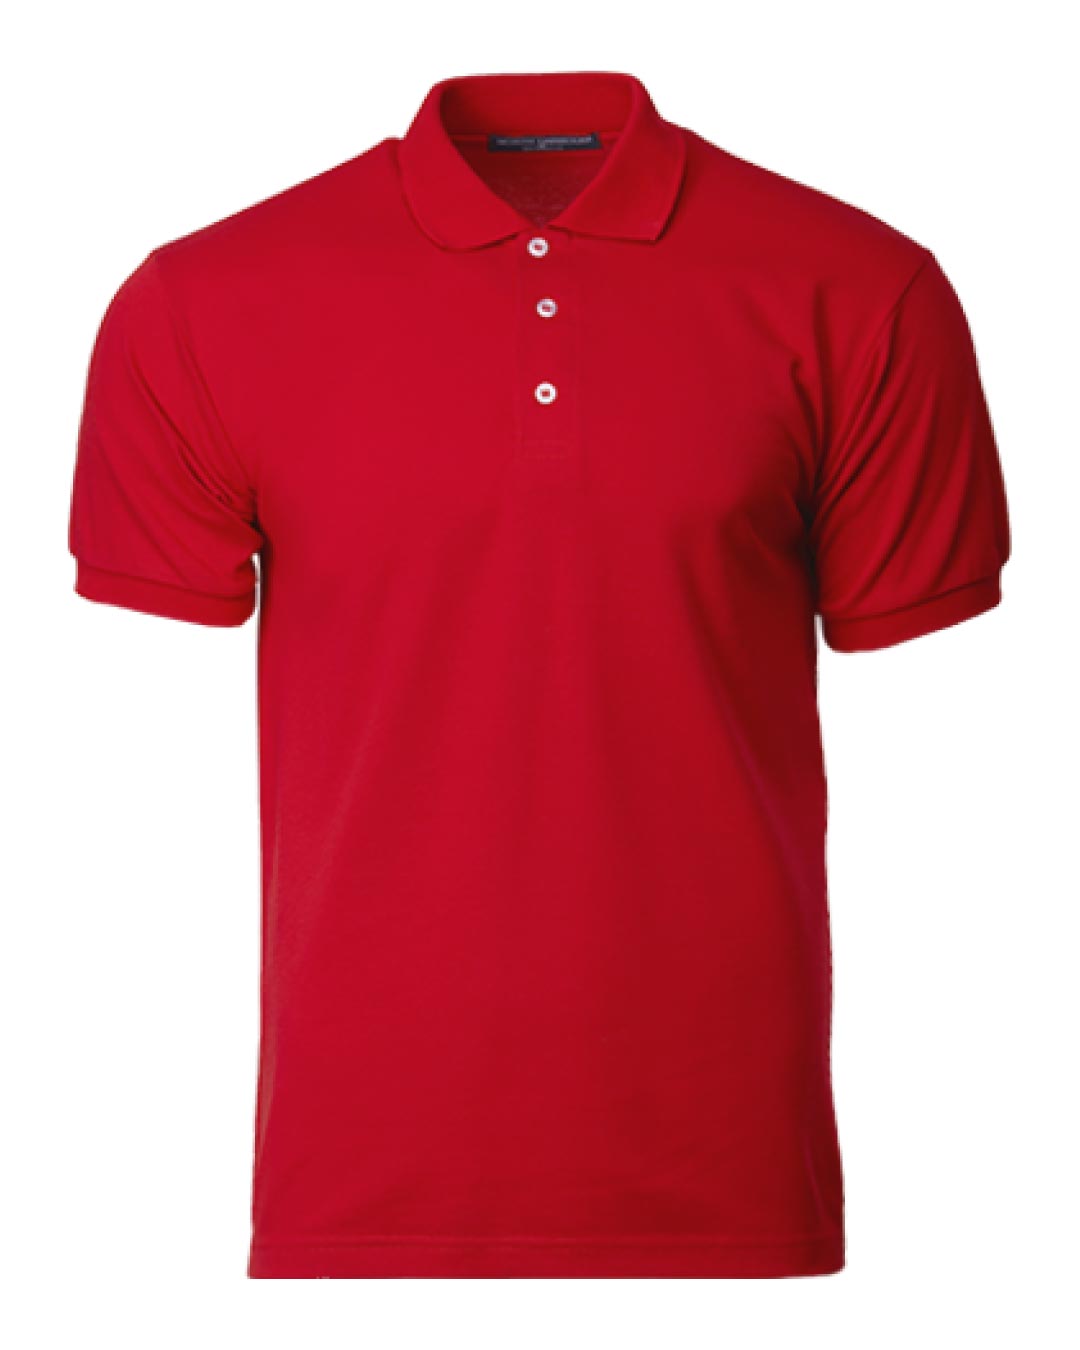 north harbour soft touch polo nhb 2400 soft touch polo